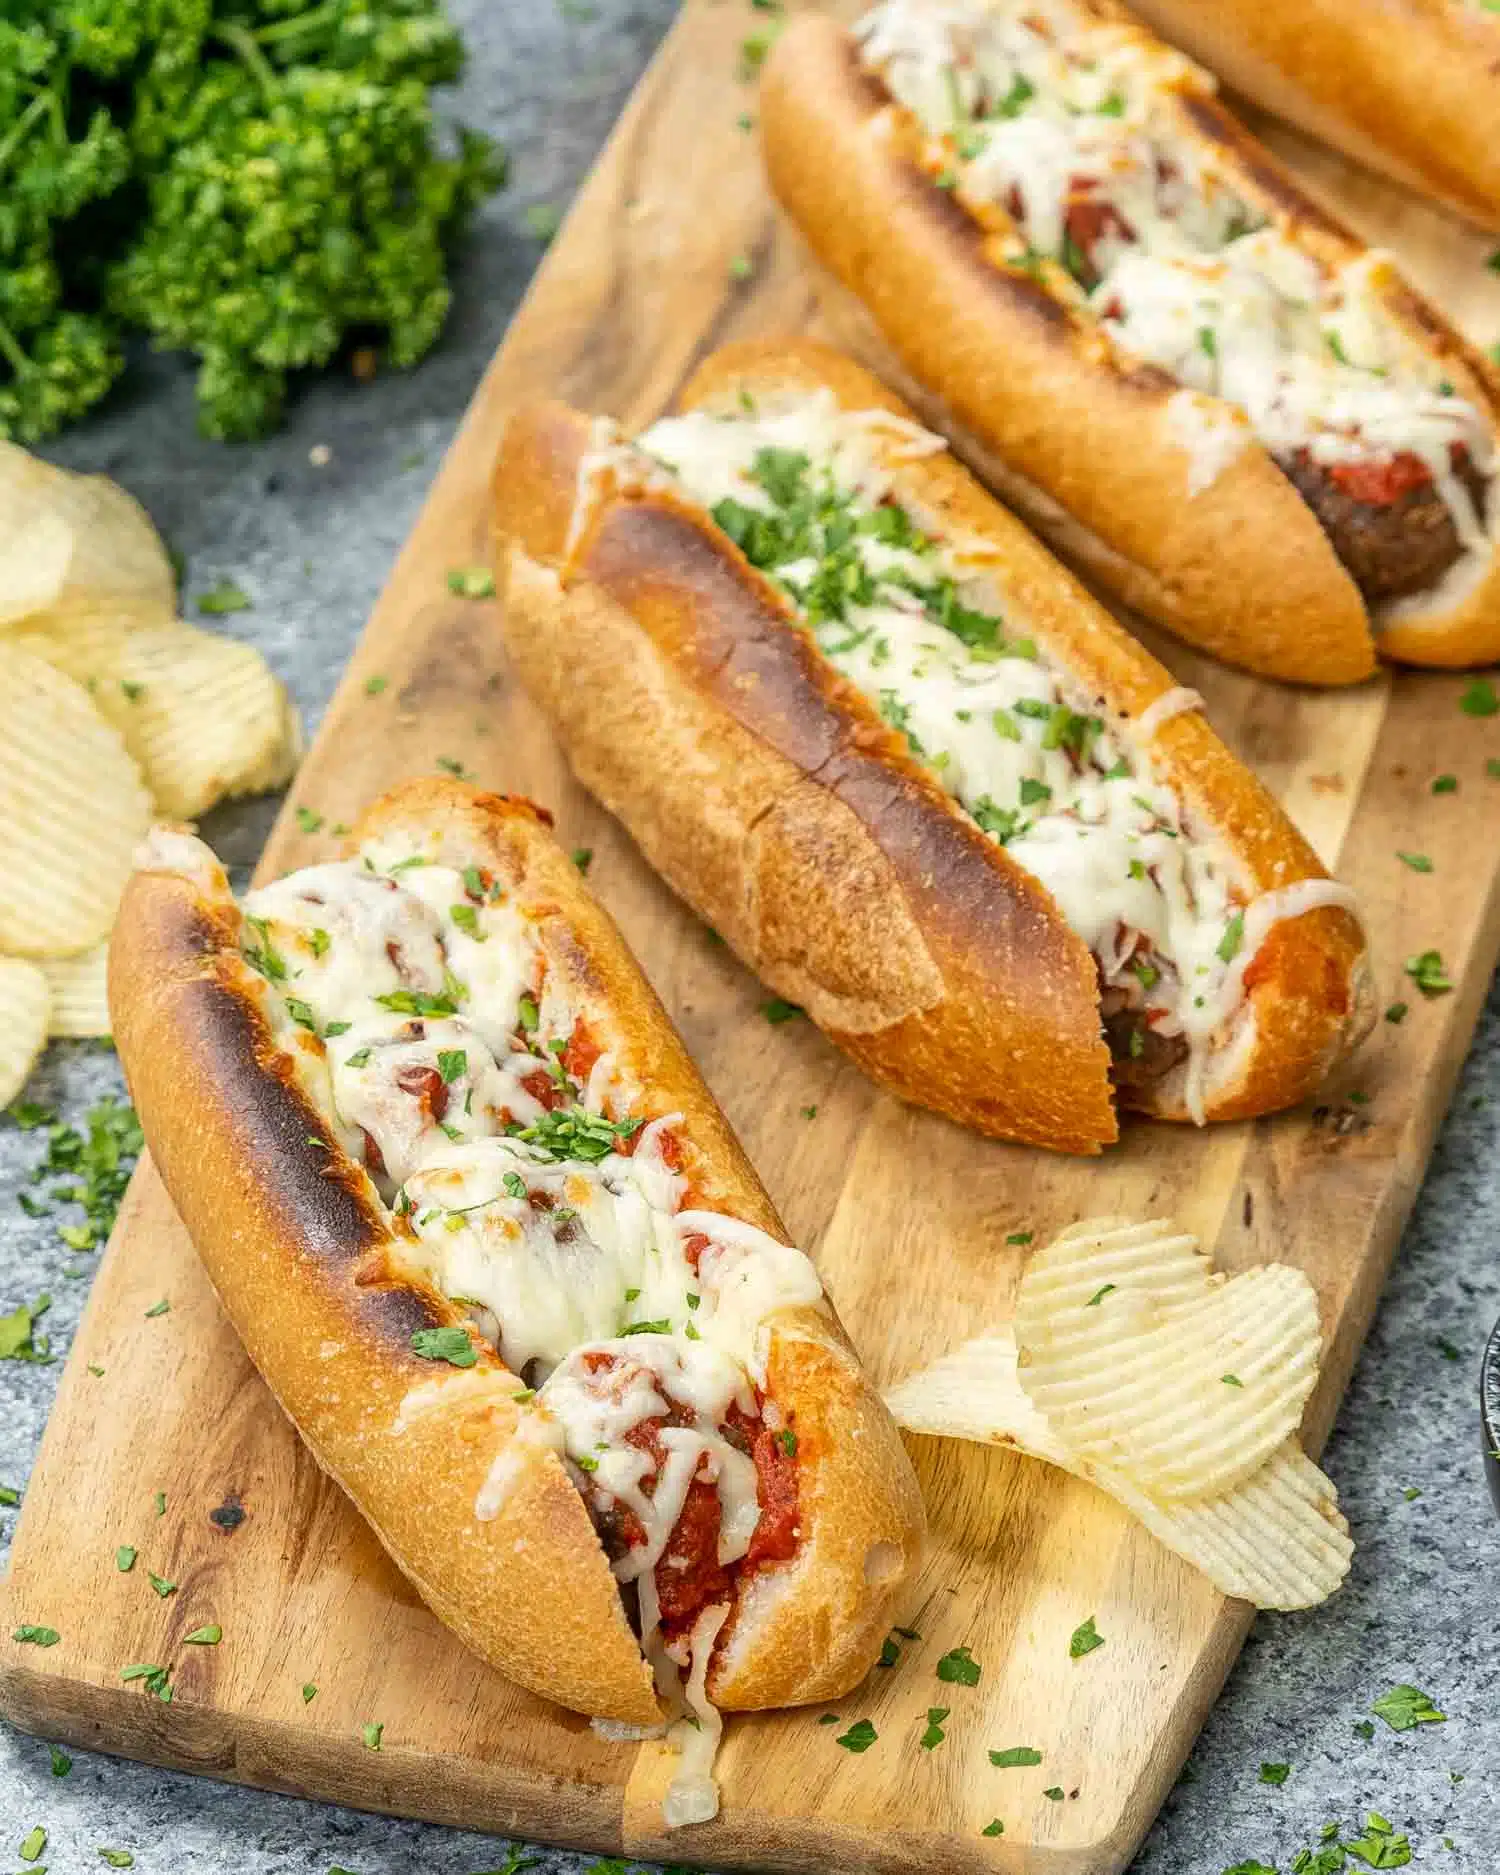 4 meatball subs on a cutting board with potato chips.